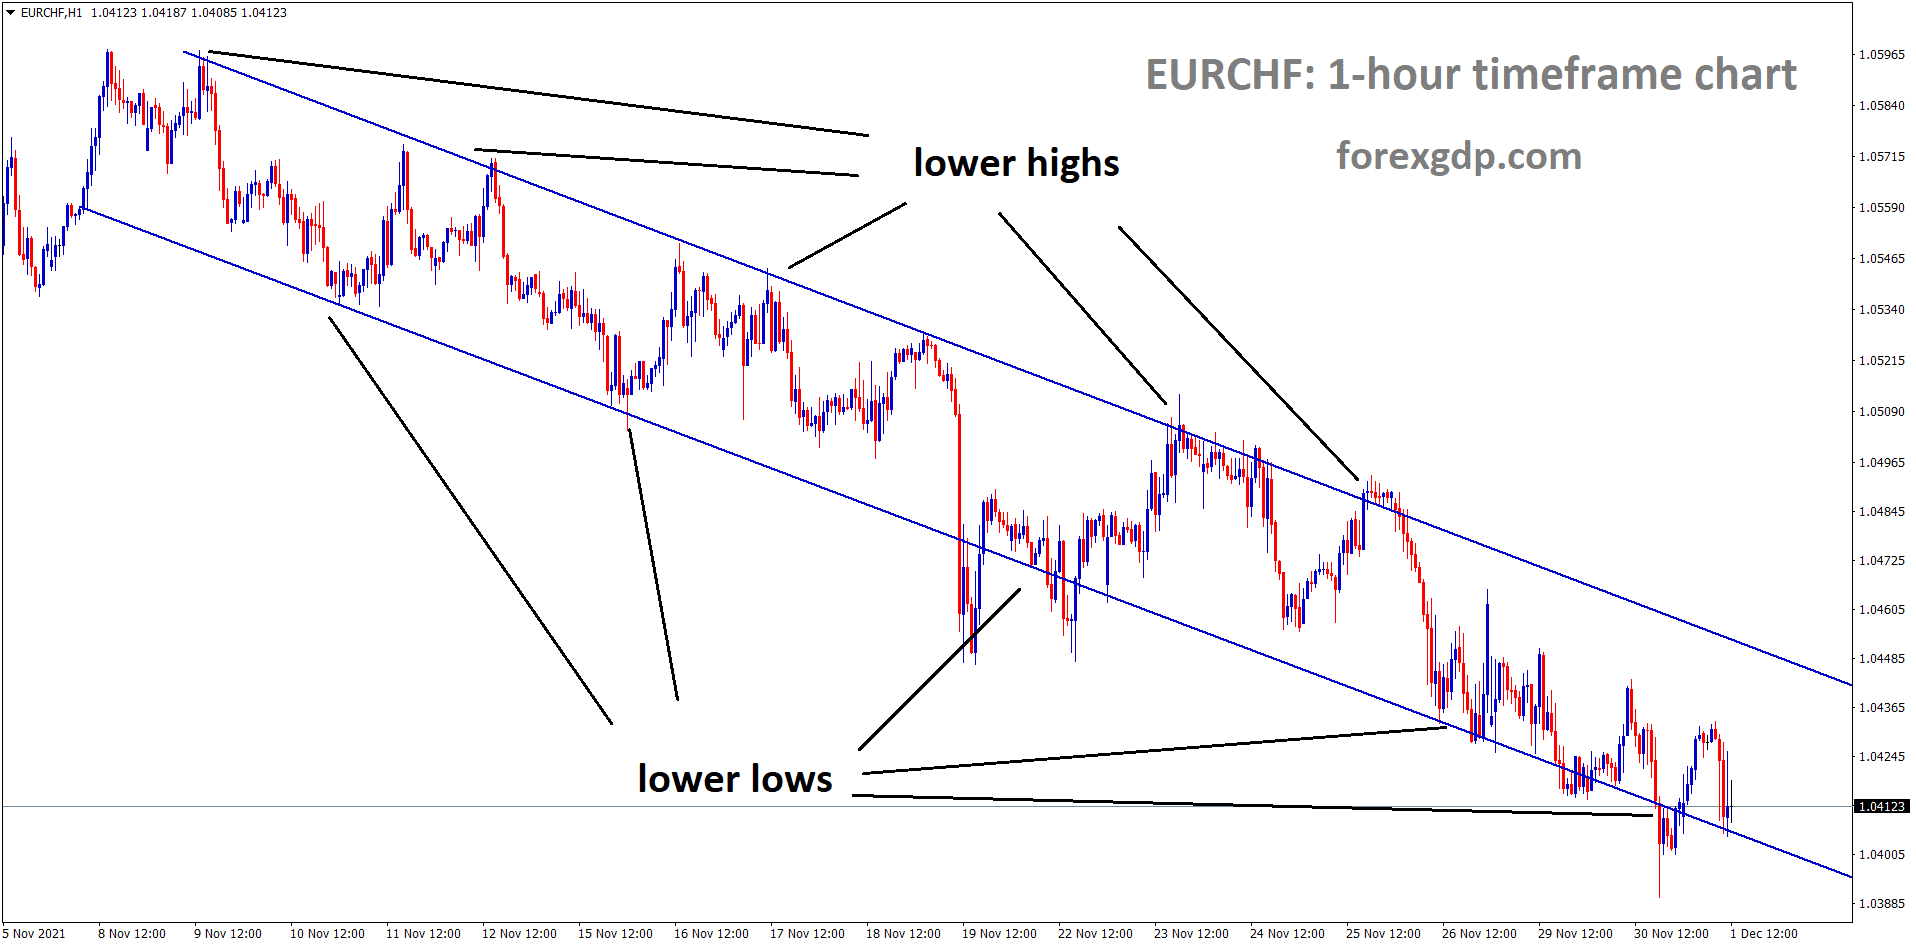 EURCHF is moving in the Descending channel and the market reached the lower low area of the channel